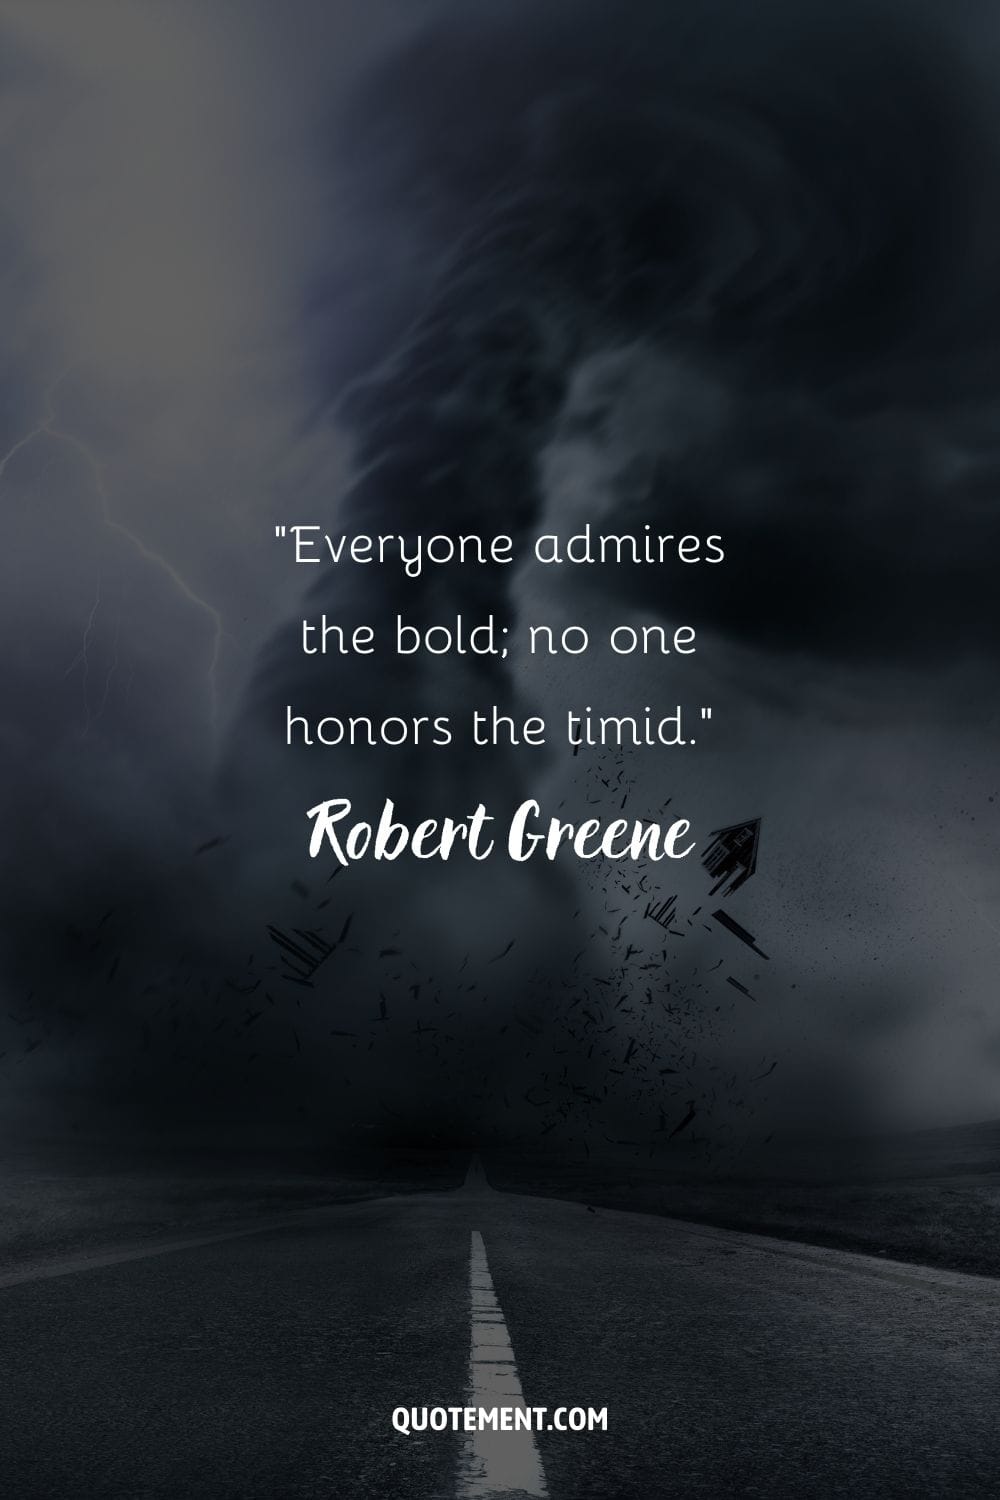 “Everyone admires the bold; no one honors the timid.” ― Robert Greene, The 48 Laws of Power